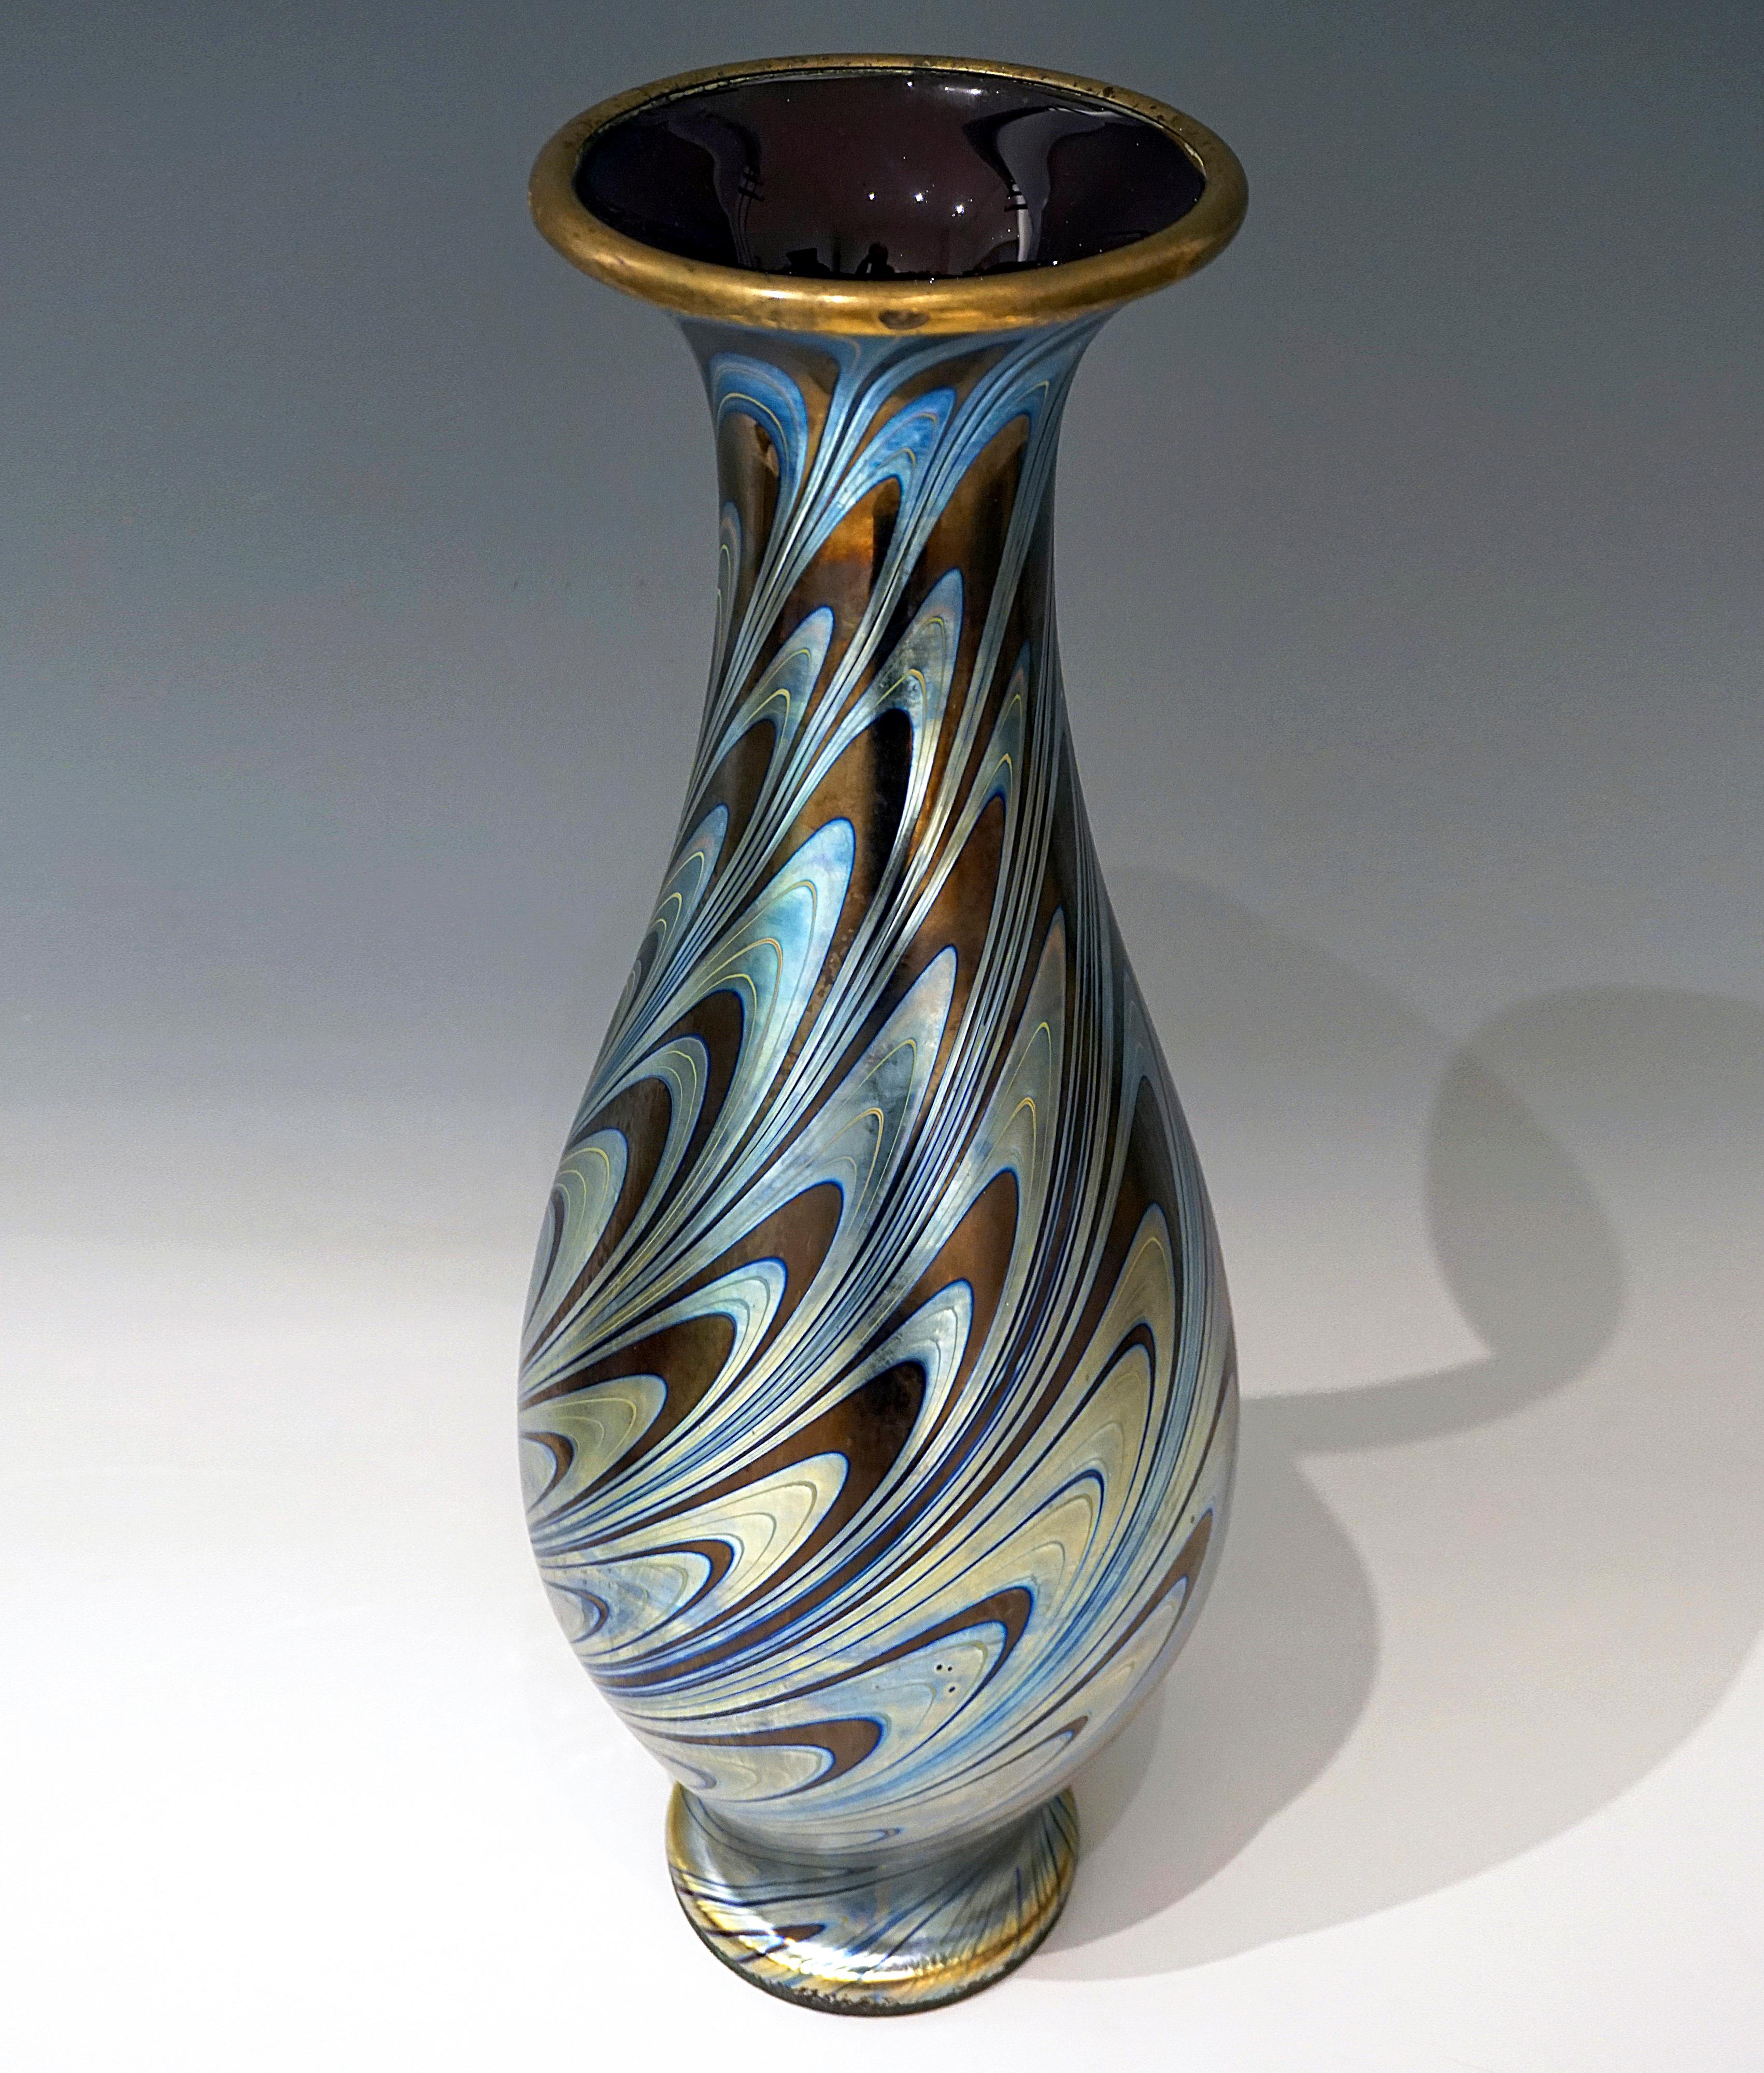 Large Loetz Art Nouveau Vase, Ruby Phenomenon Gre 7624, Austria-Hungary, Ca 1898 In Good Condition For Sale In Vienna, AT